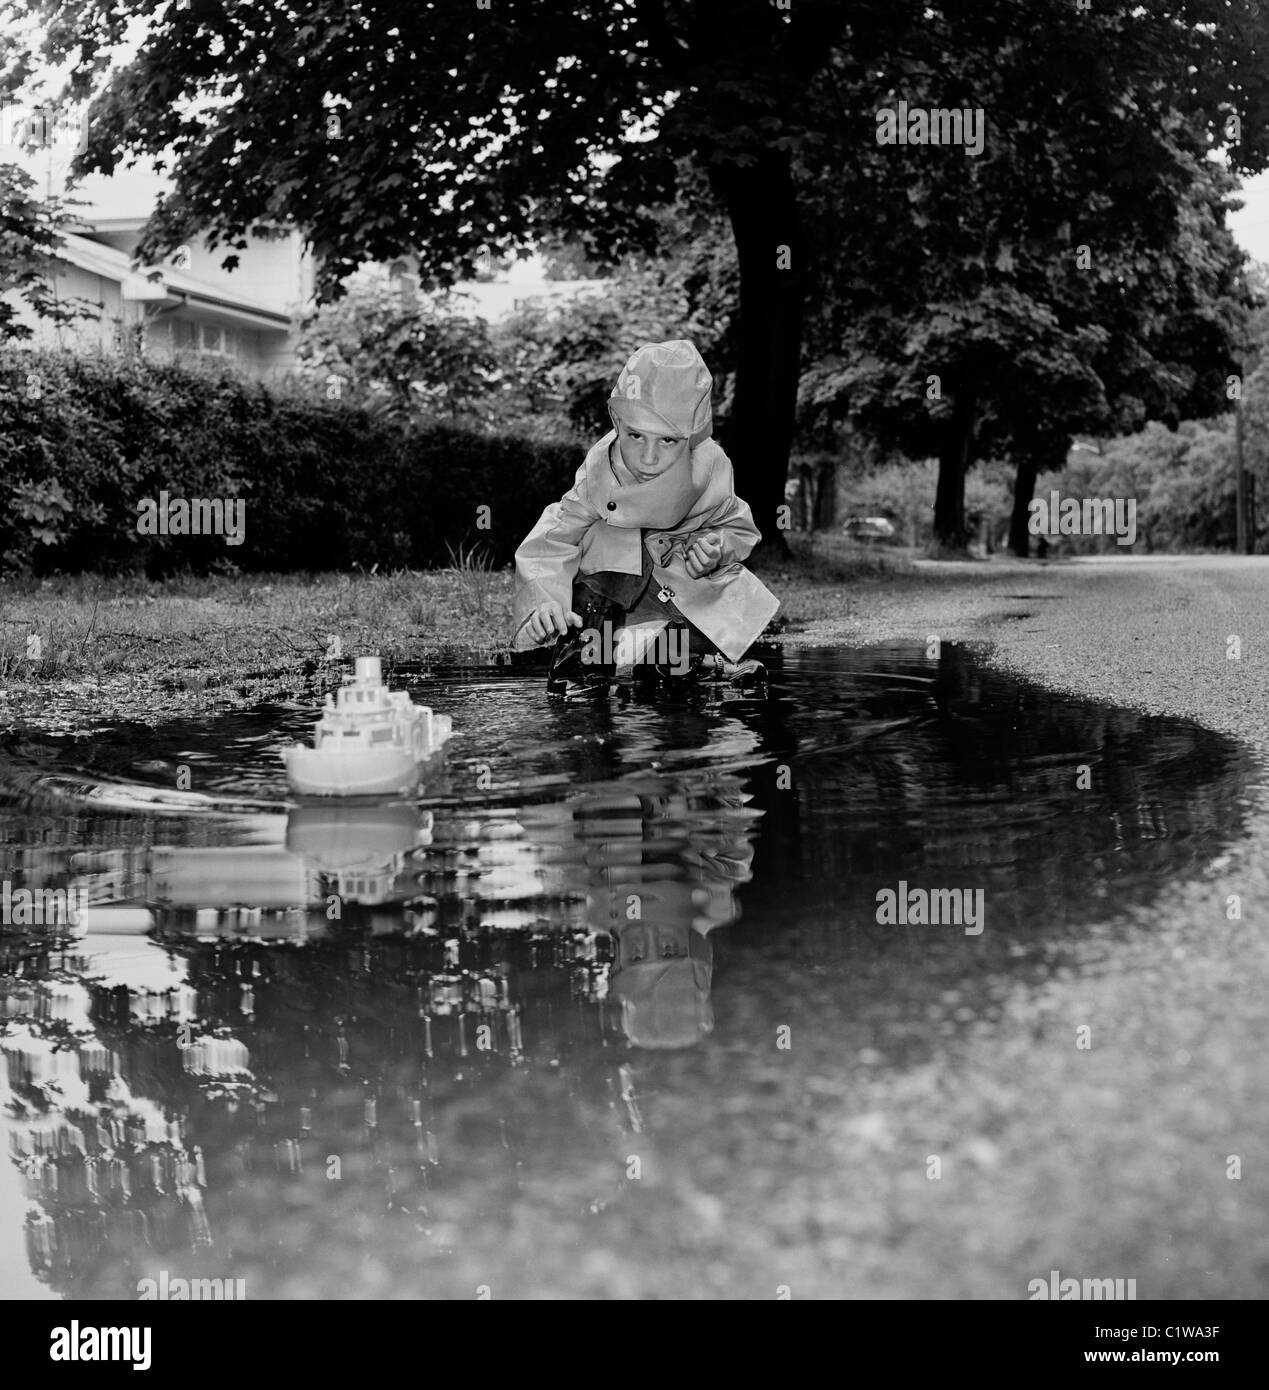 Boy Playing with toy boat in puddle Banque D'Images